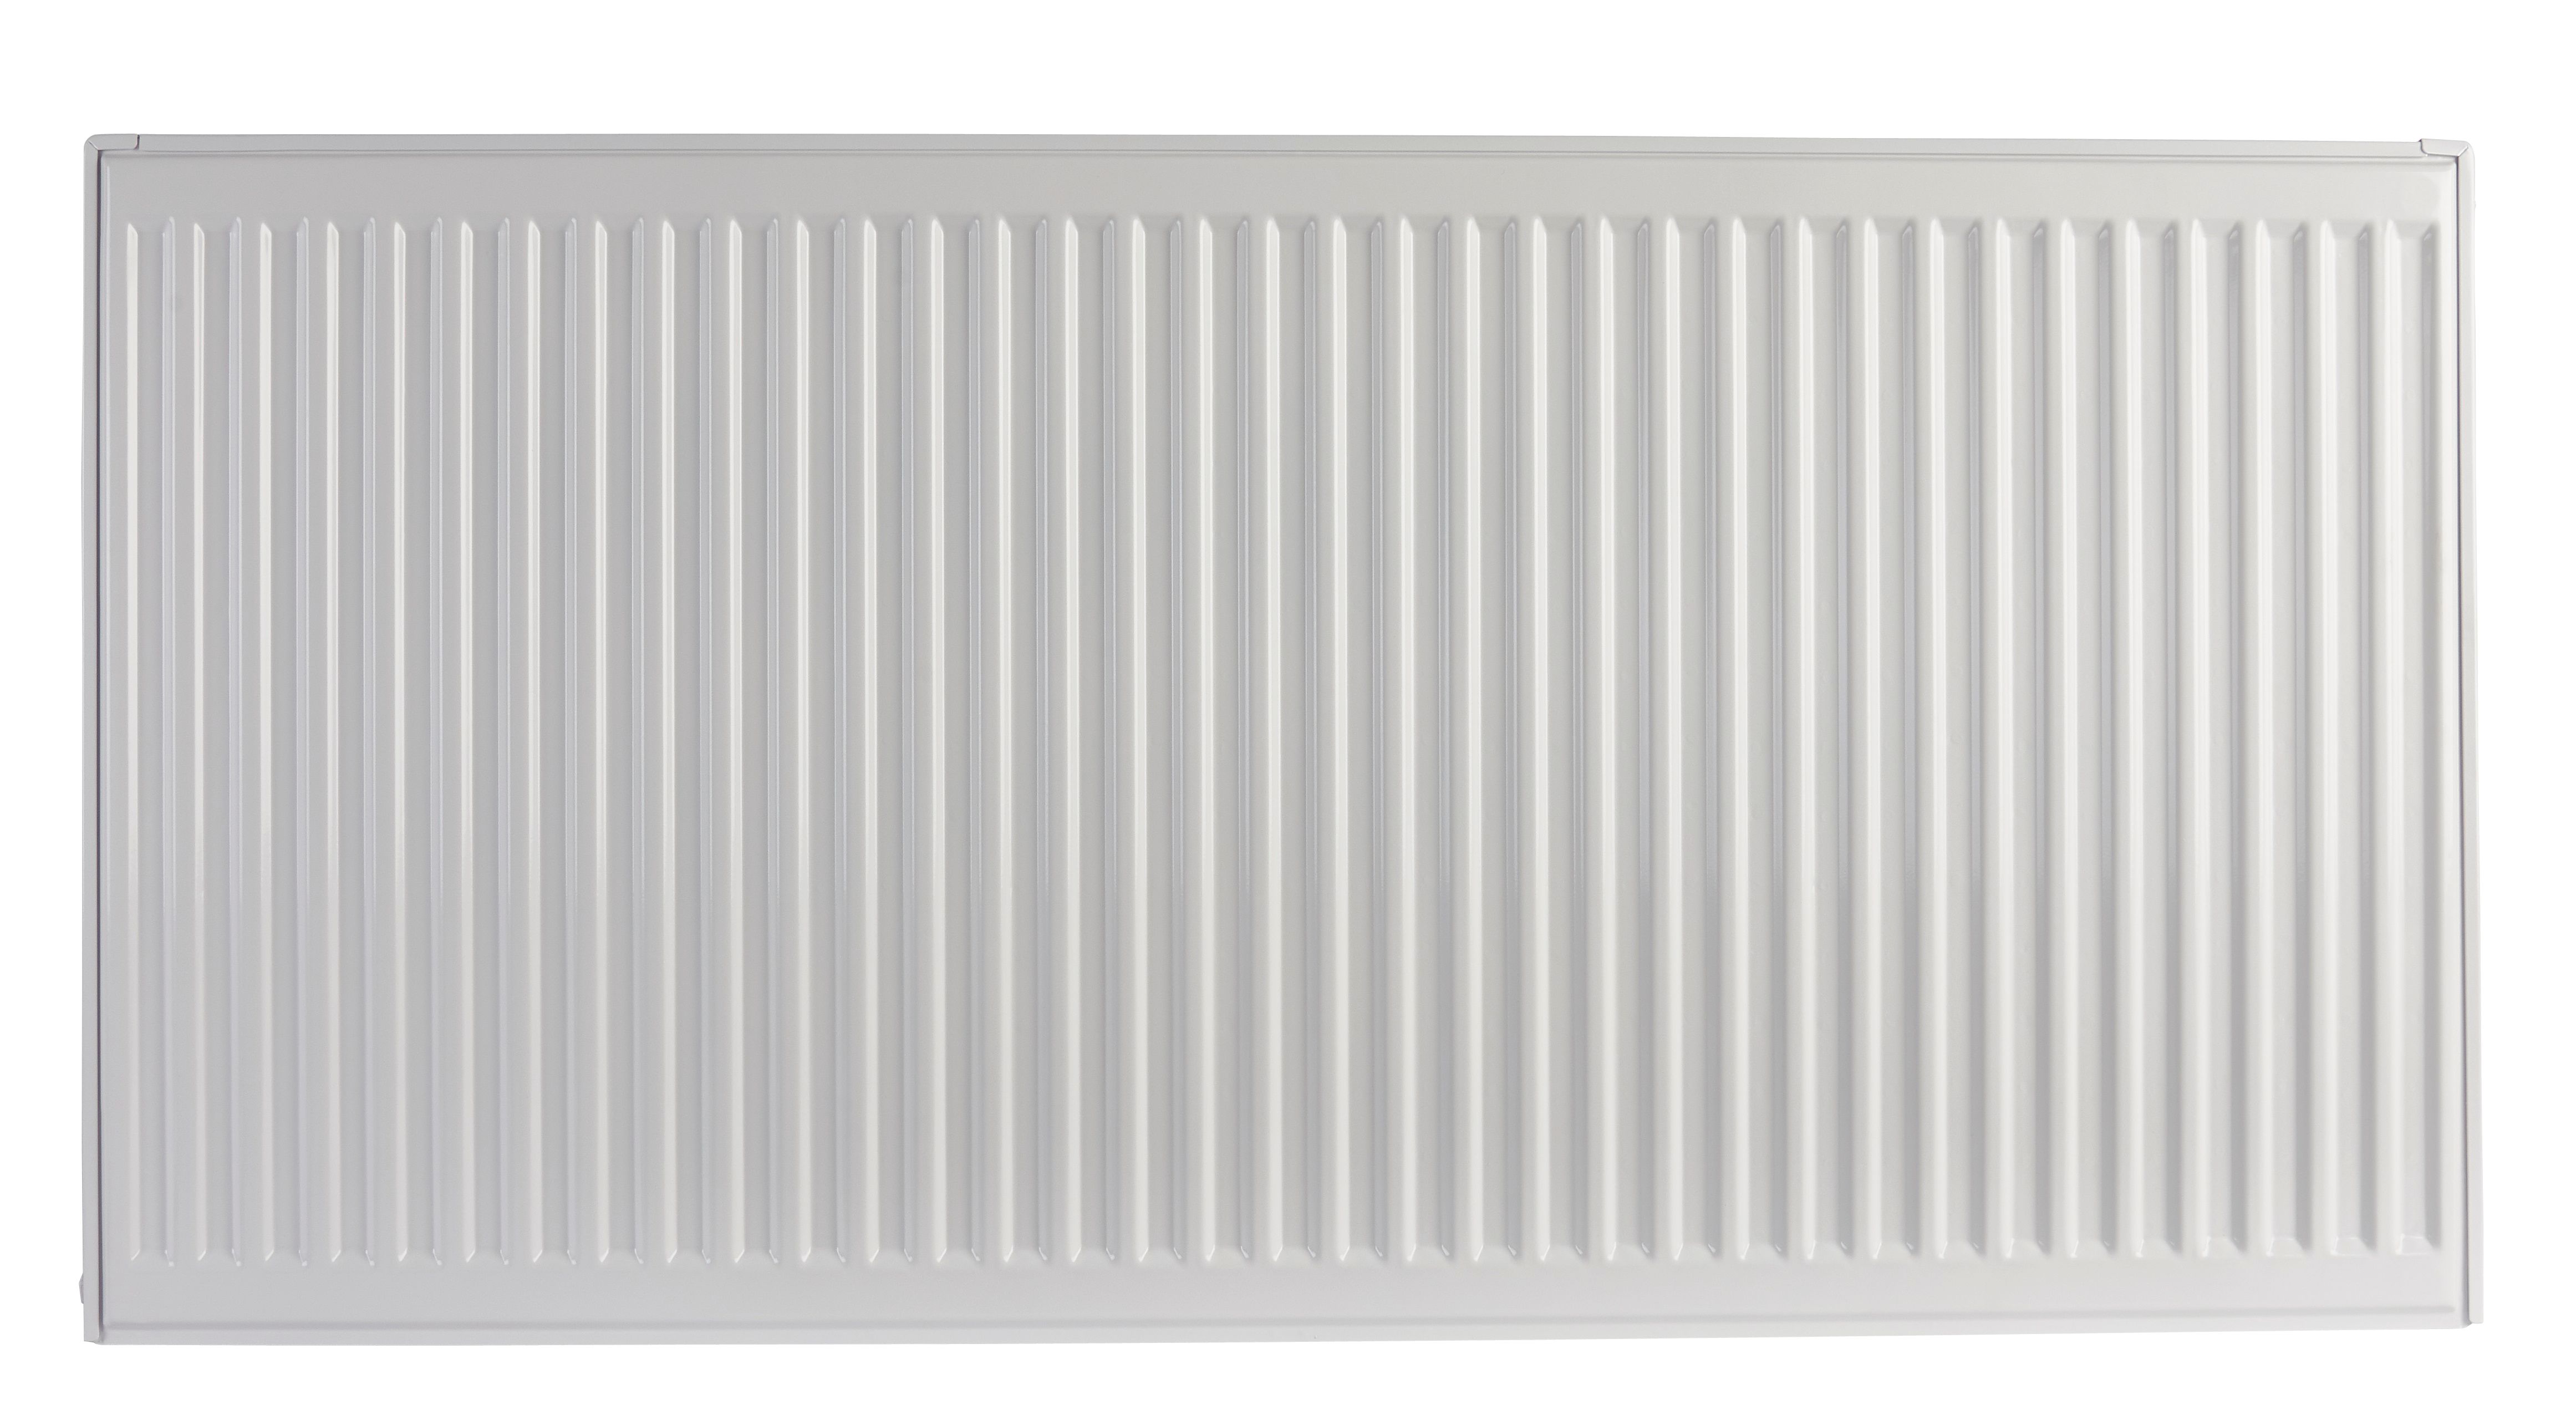 Homeline by Stelrad 500 x 1200mm Type 21 Double Panel Plus Single Convector Radiator